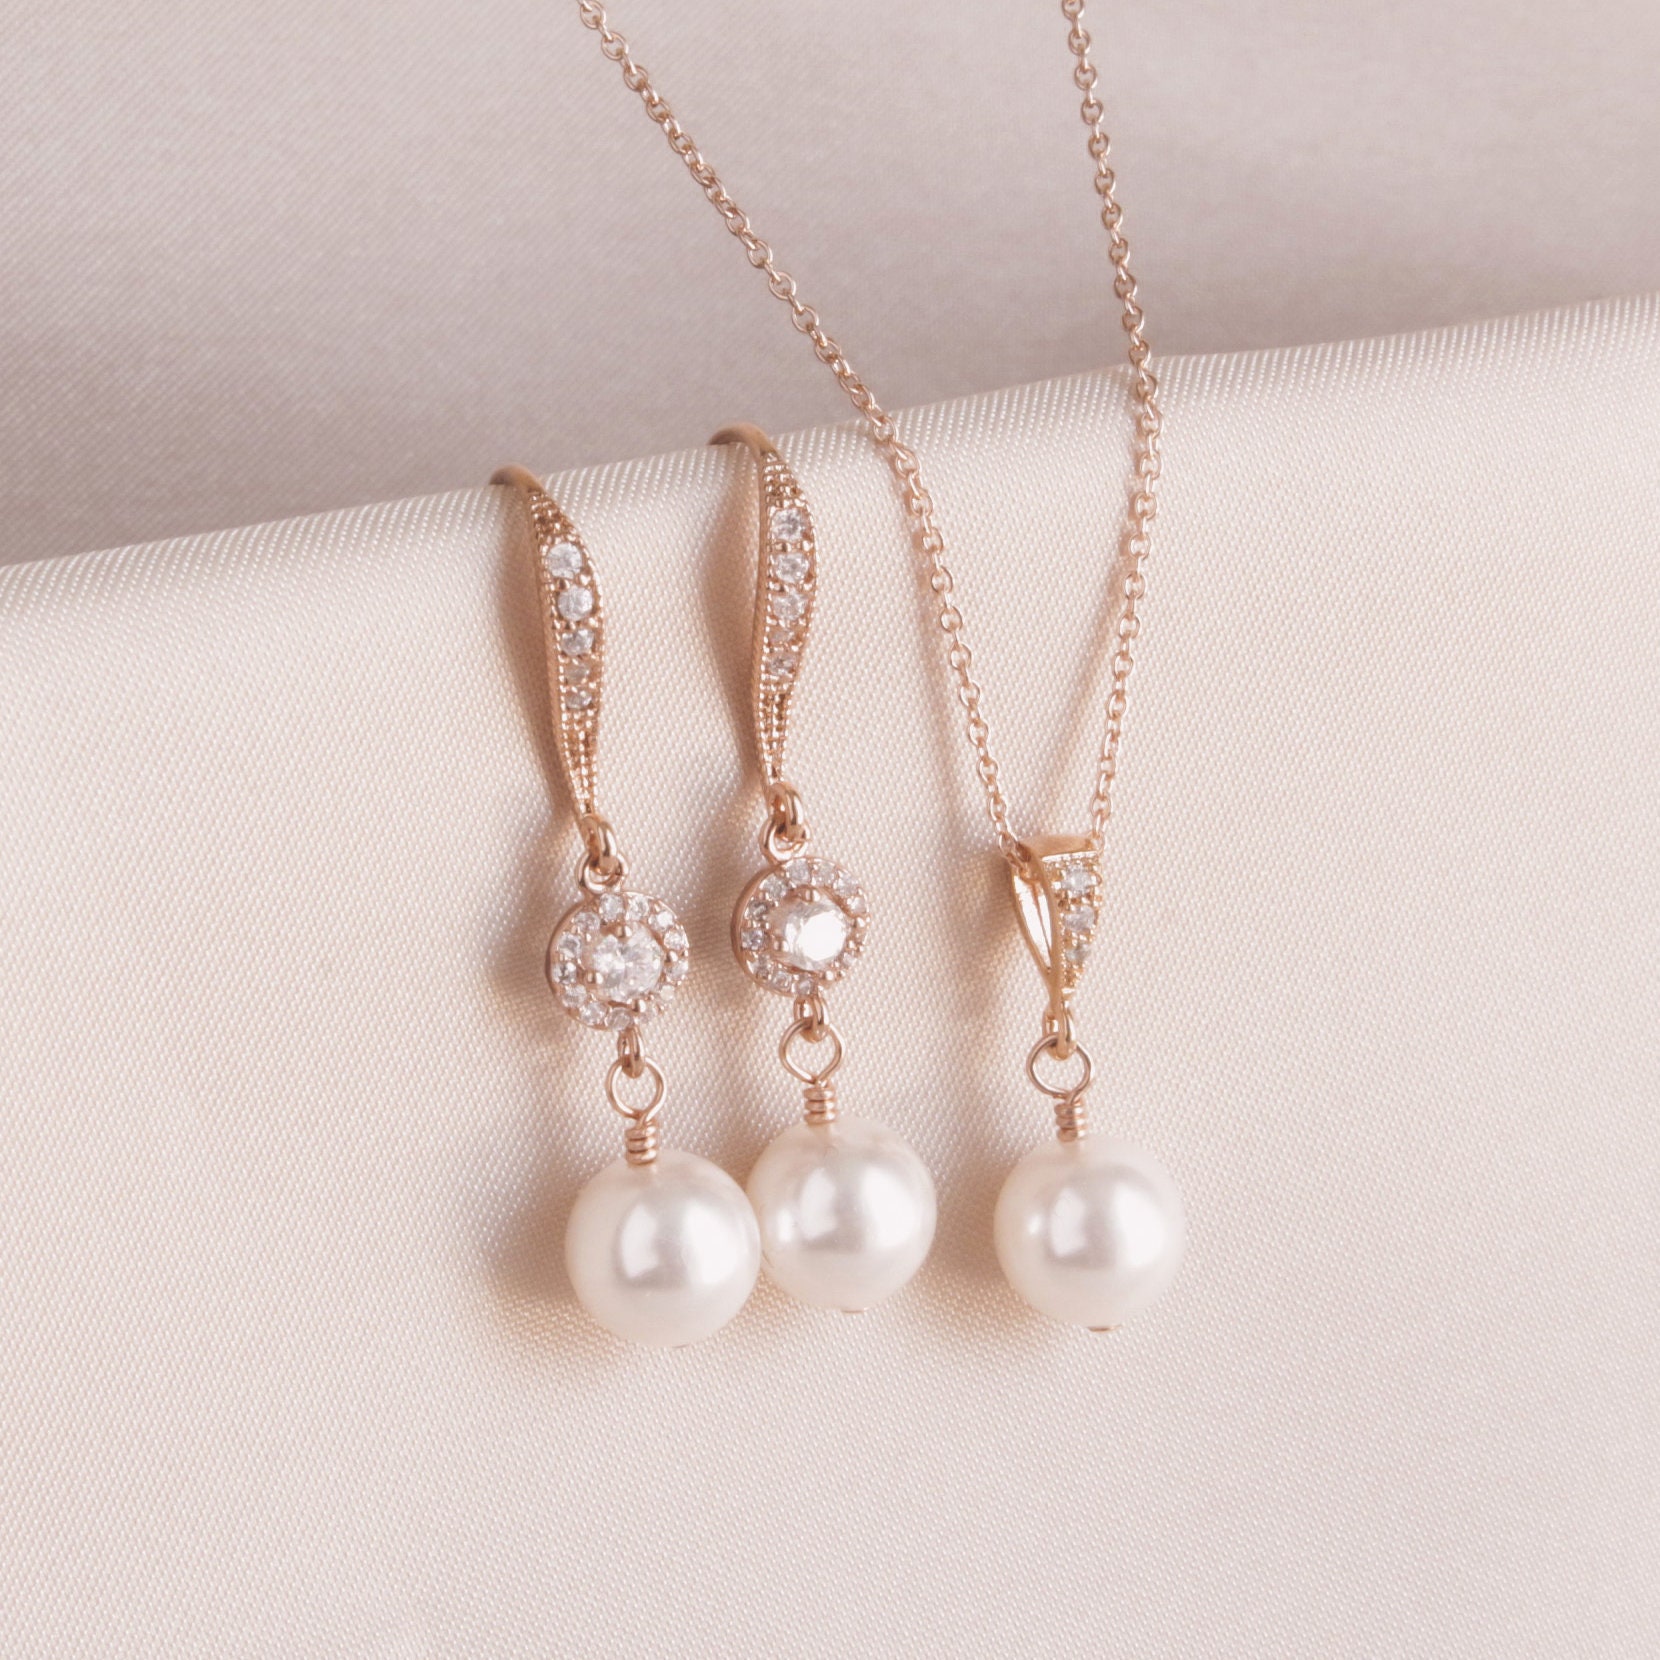 Rose Gold Pearl Necklace Earring Set And Earrings Set Fashionable Alloy  Jewelry For Weddings And Parties Trendy Round Pendant Necklaces For Women  And Girls From Yambags, $1.48